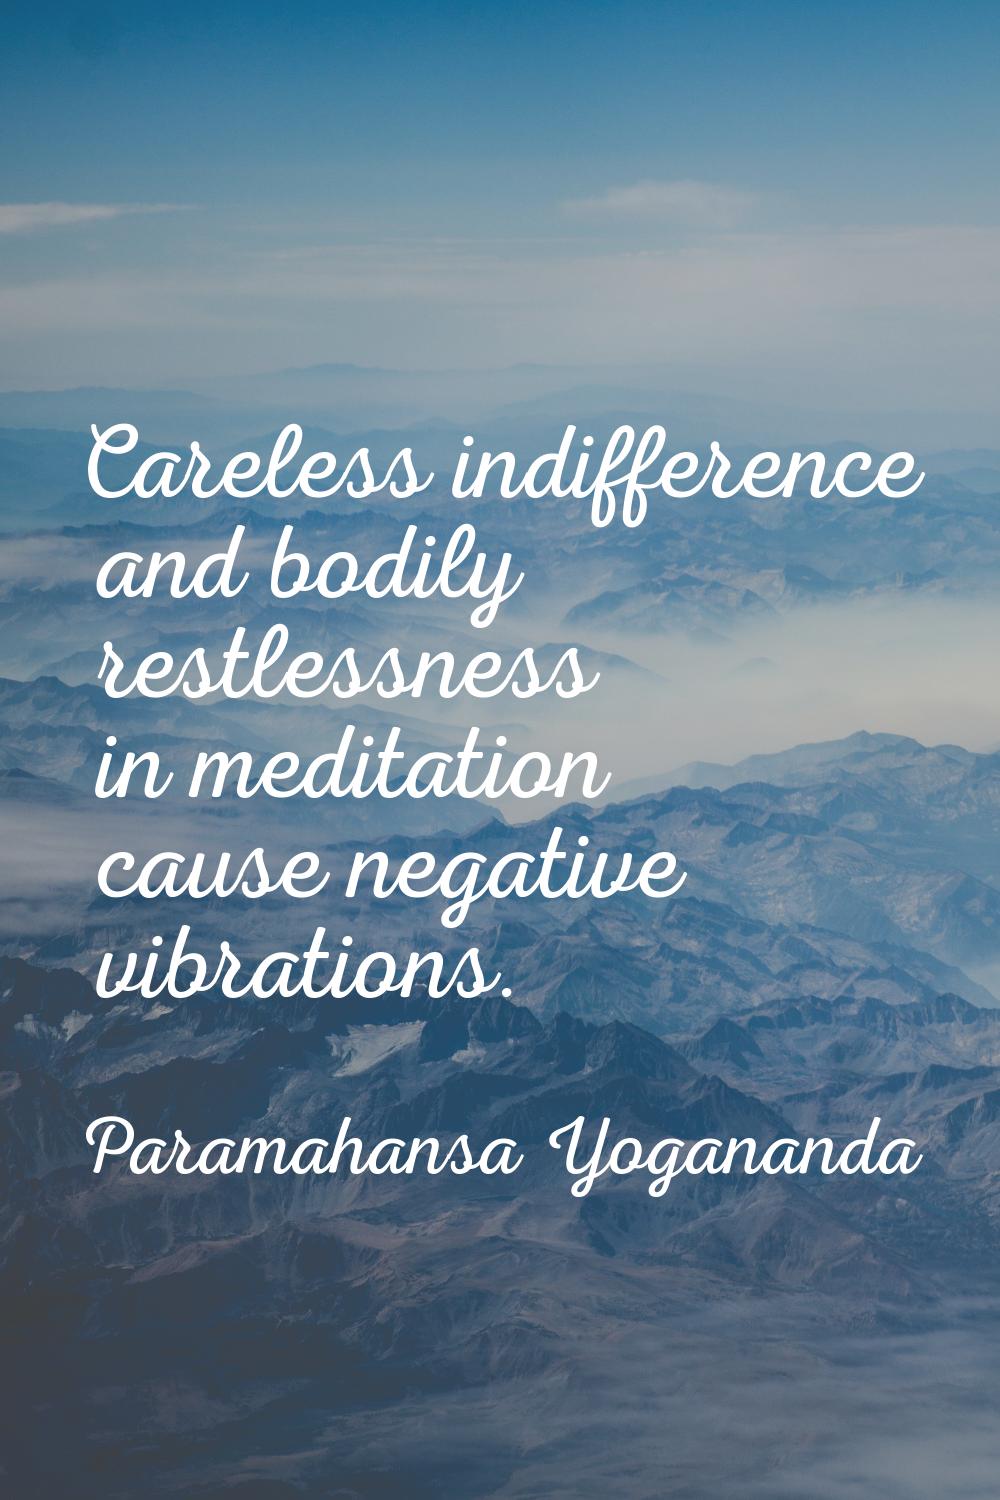 Careless indifference and bodily restlessness in meditation cause negative vibrations.